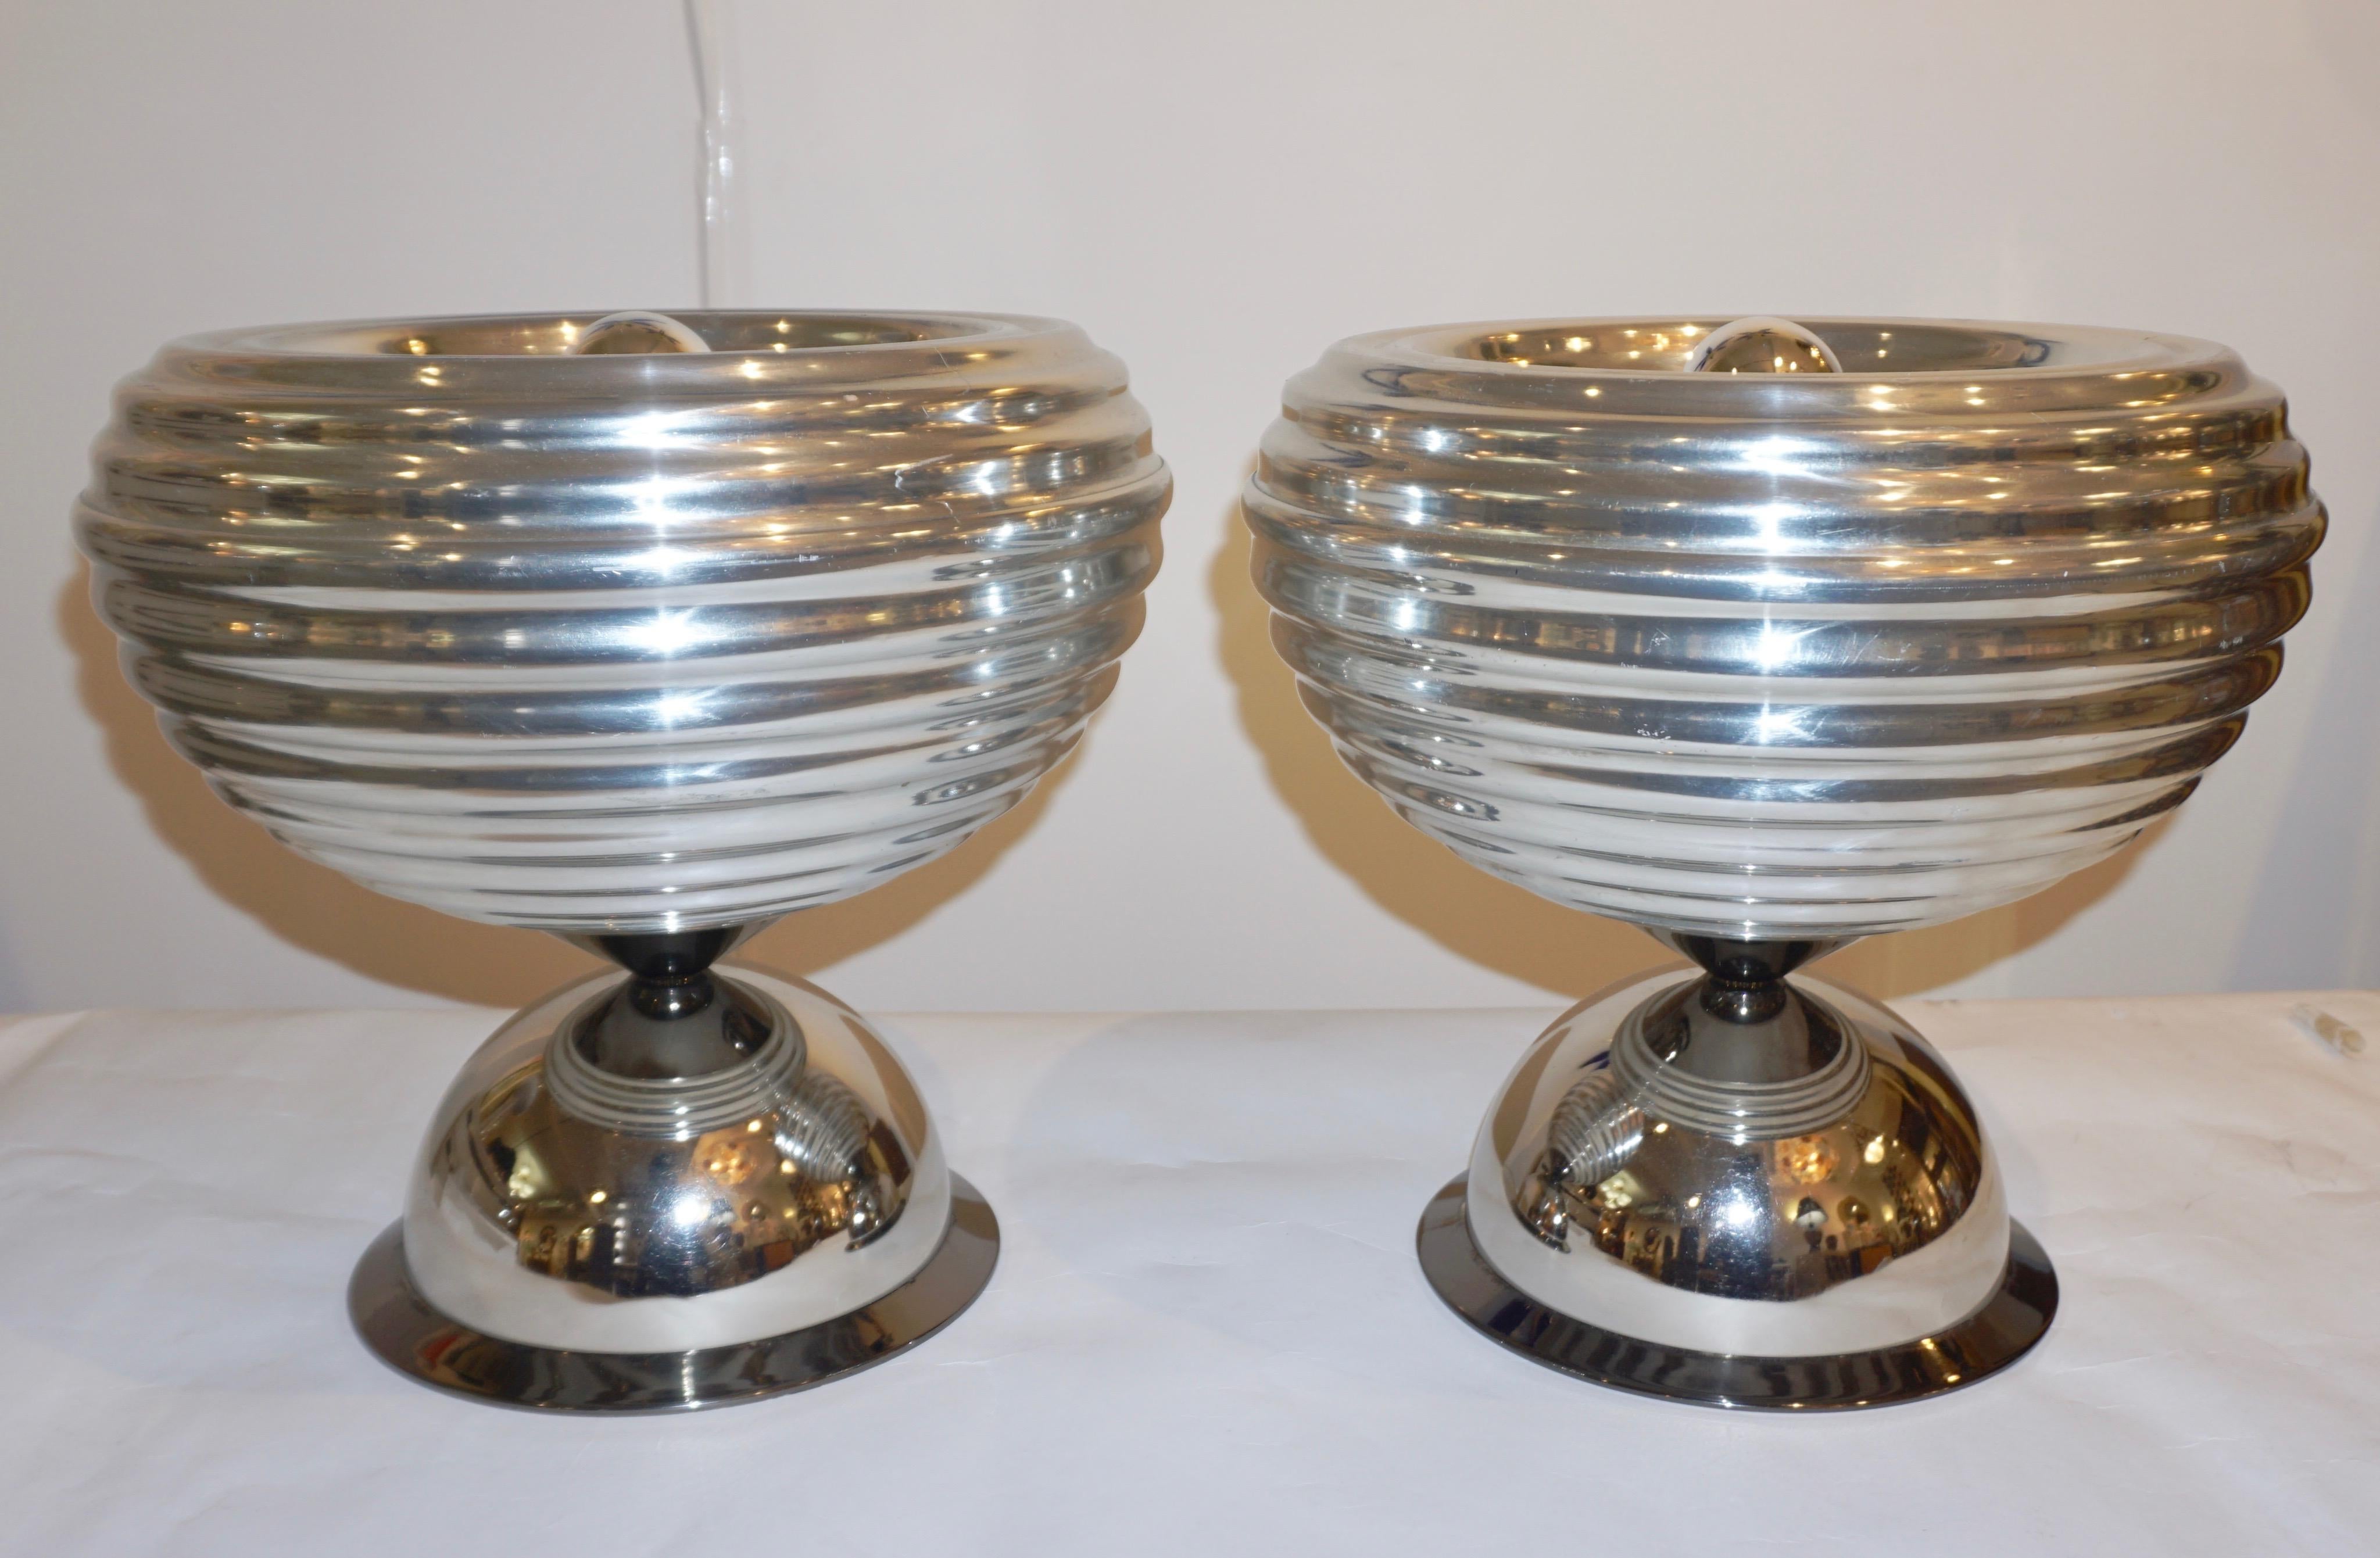 Flos 1960s Silver Tone Pair of Castiglioni Round Polished Aluminum Table Lamps 11